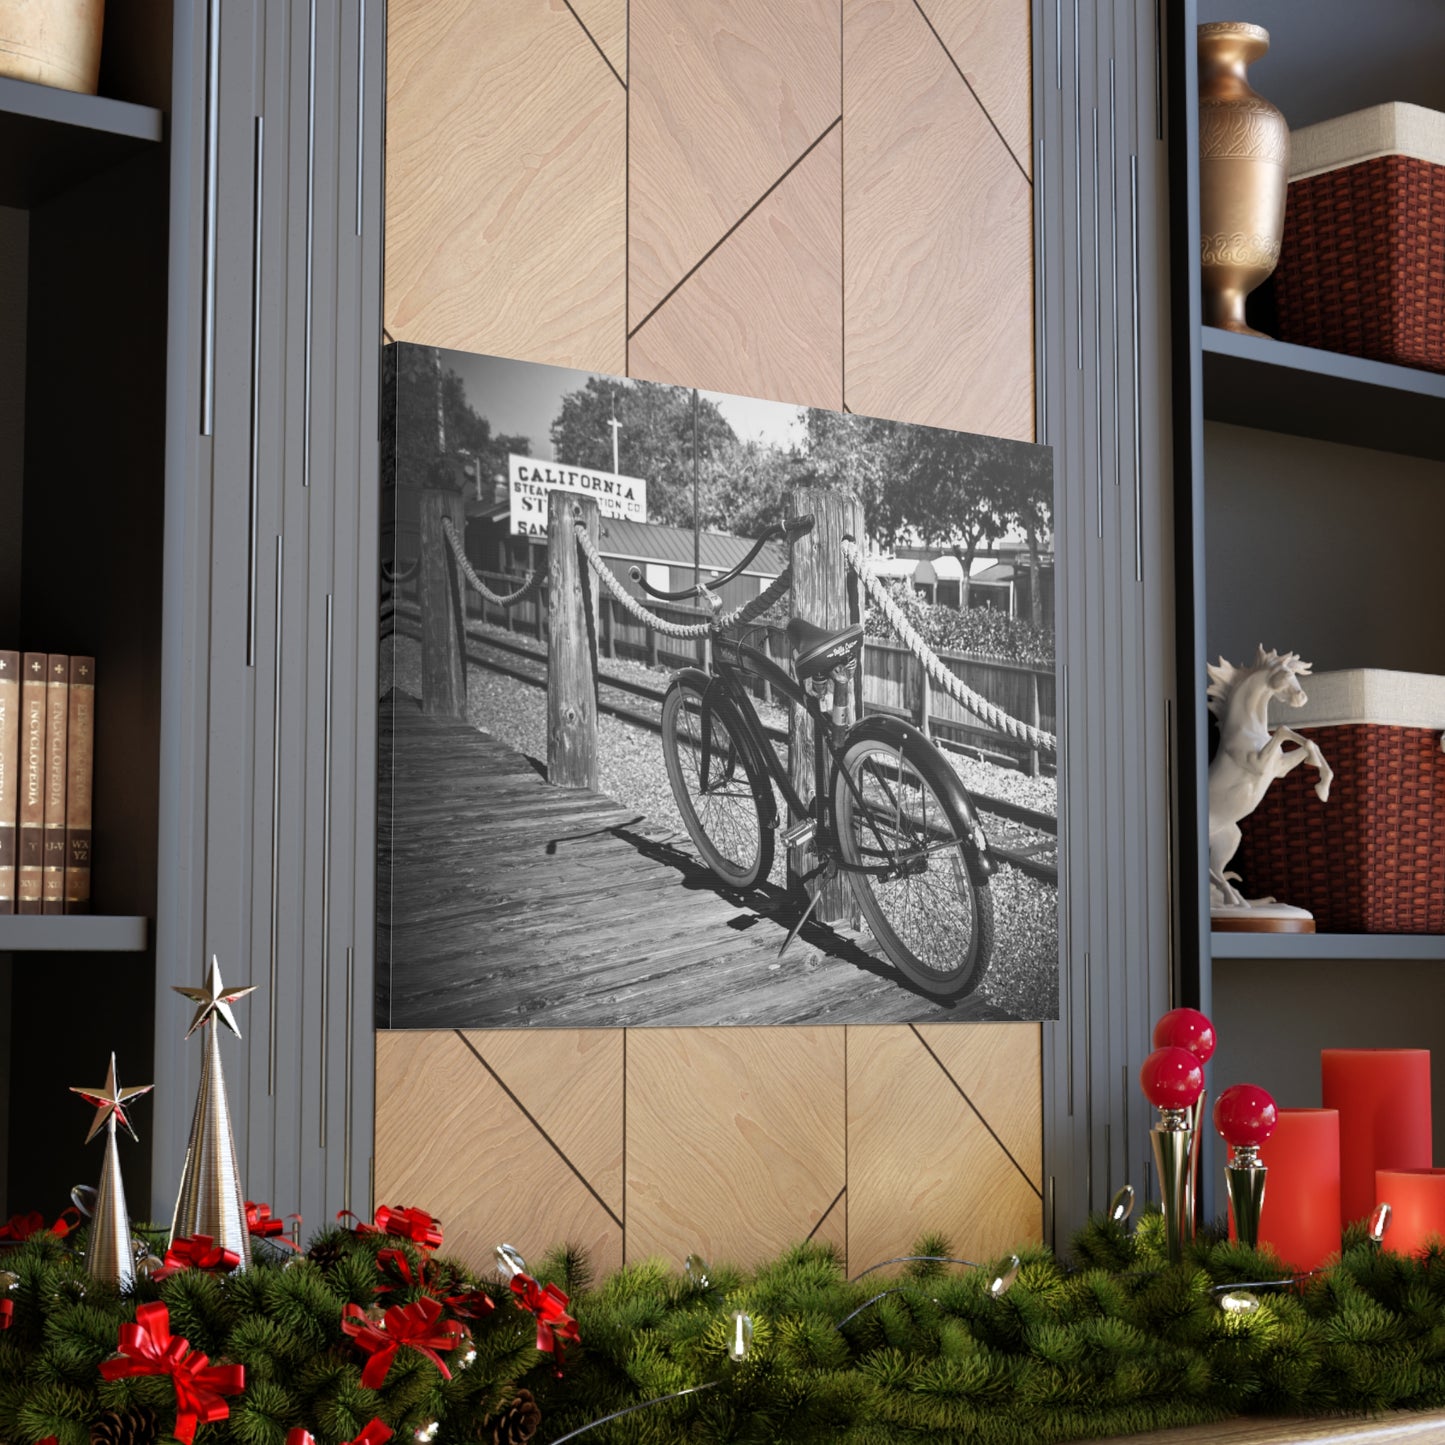 Canvas Print Of Bike And Train Tracks in California For Wall Art